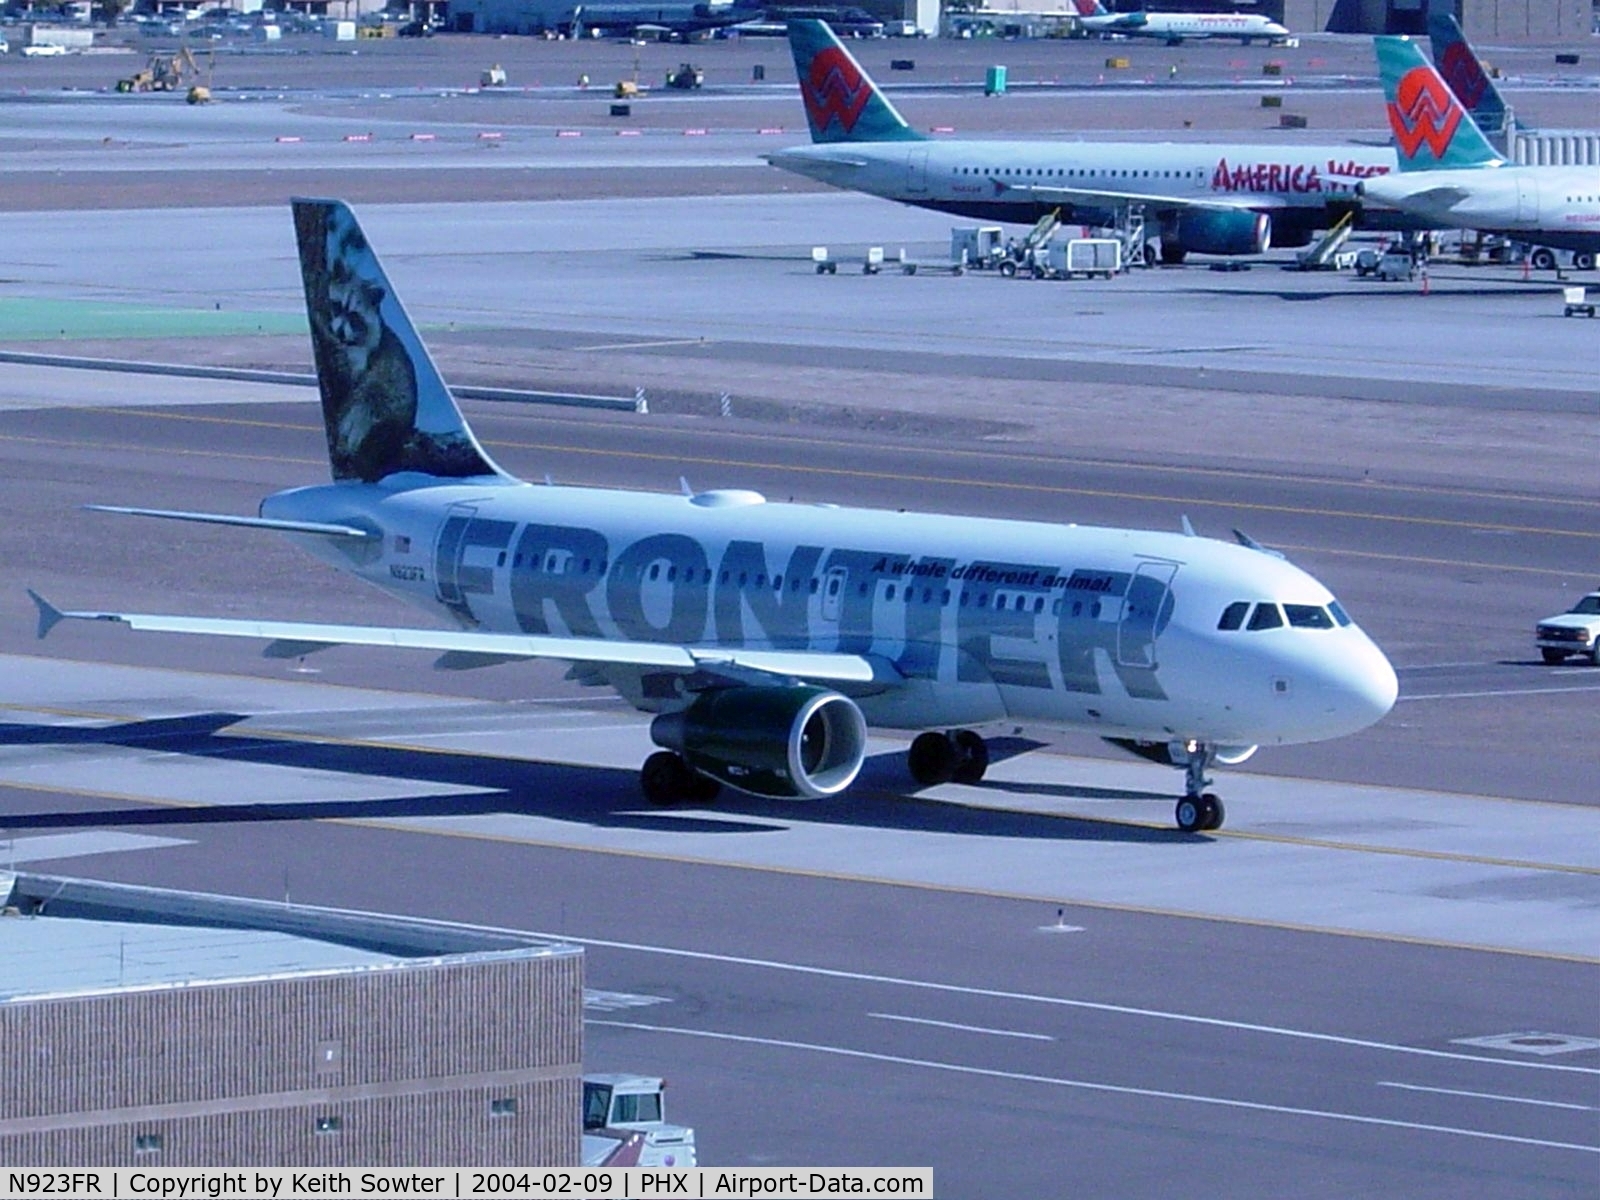 N923FR, 2003 Airbus A319-111 C/N 2019, Taxying over the Skybridge